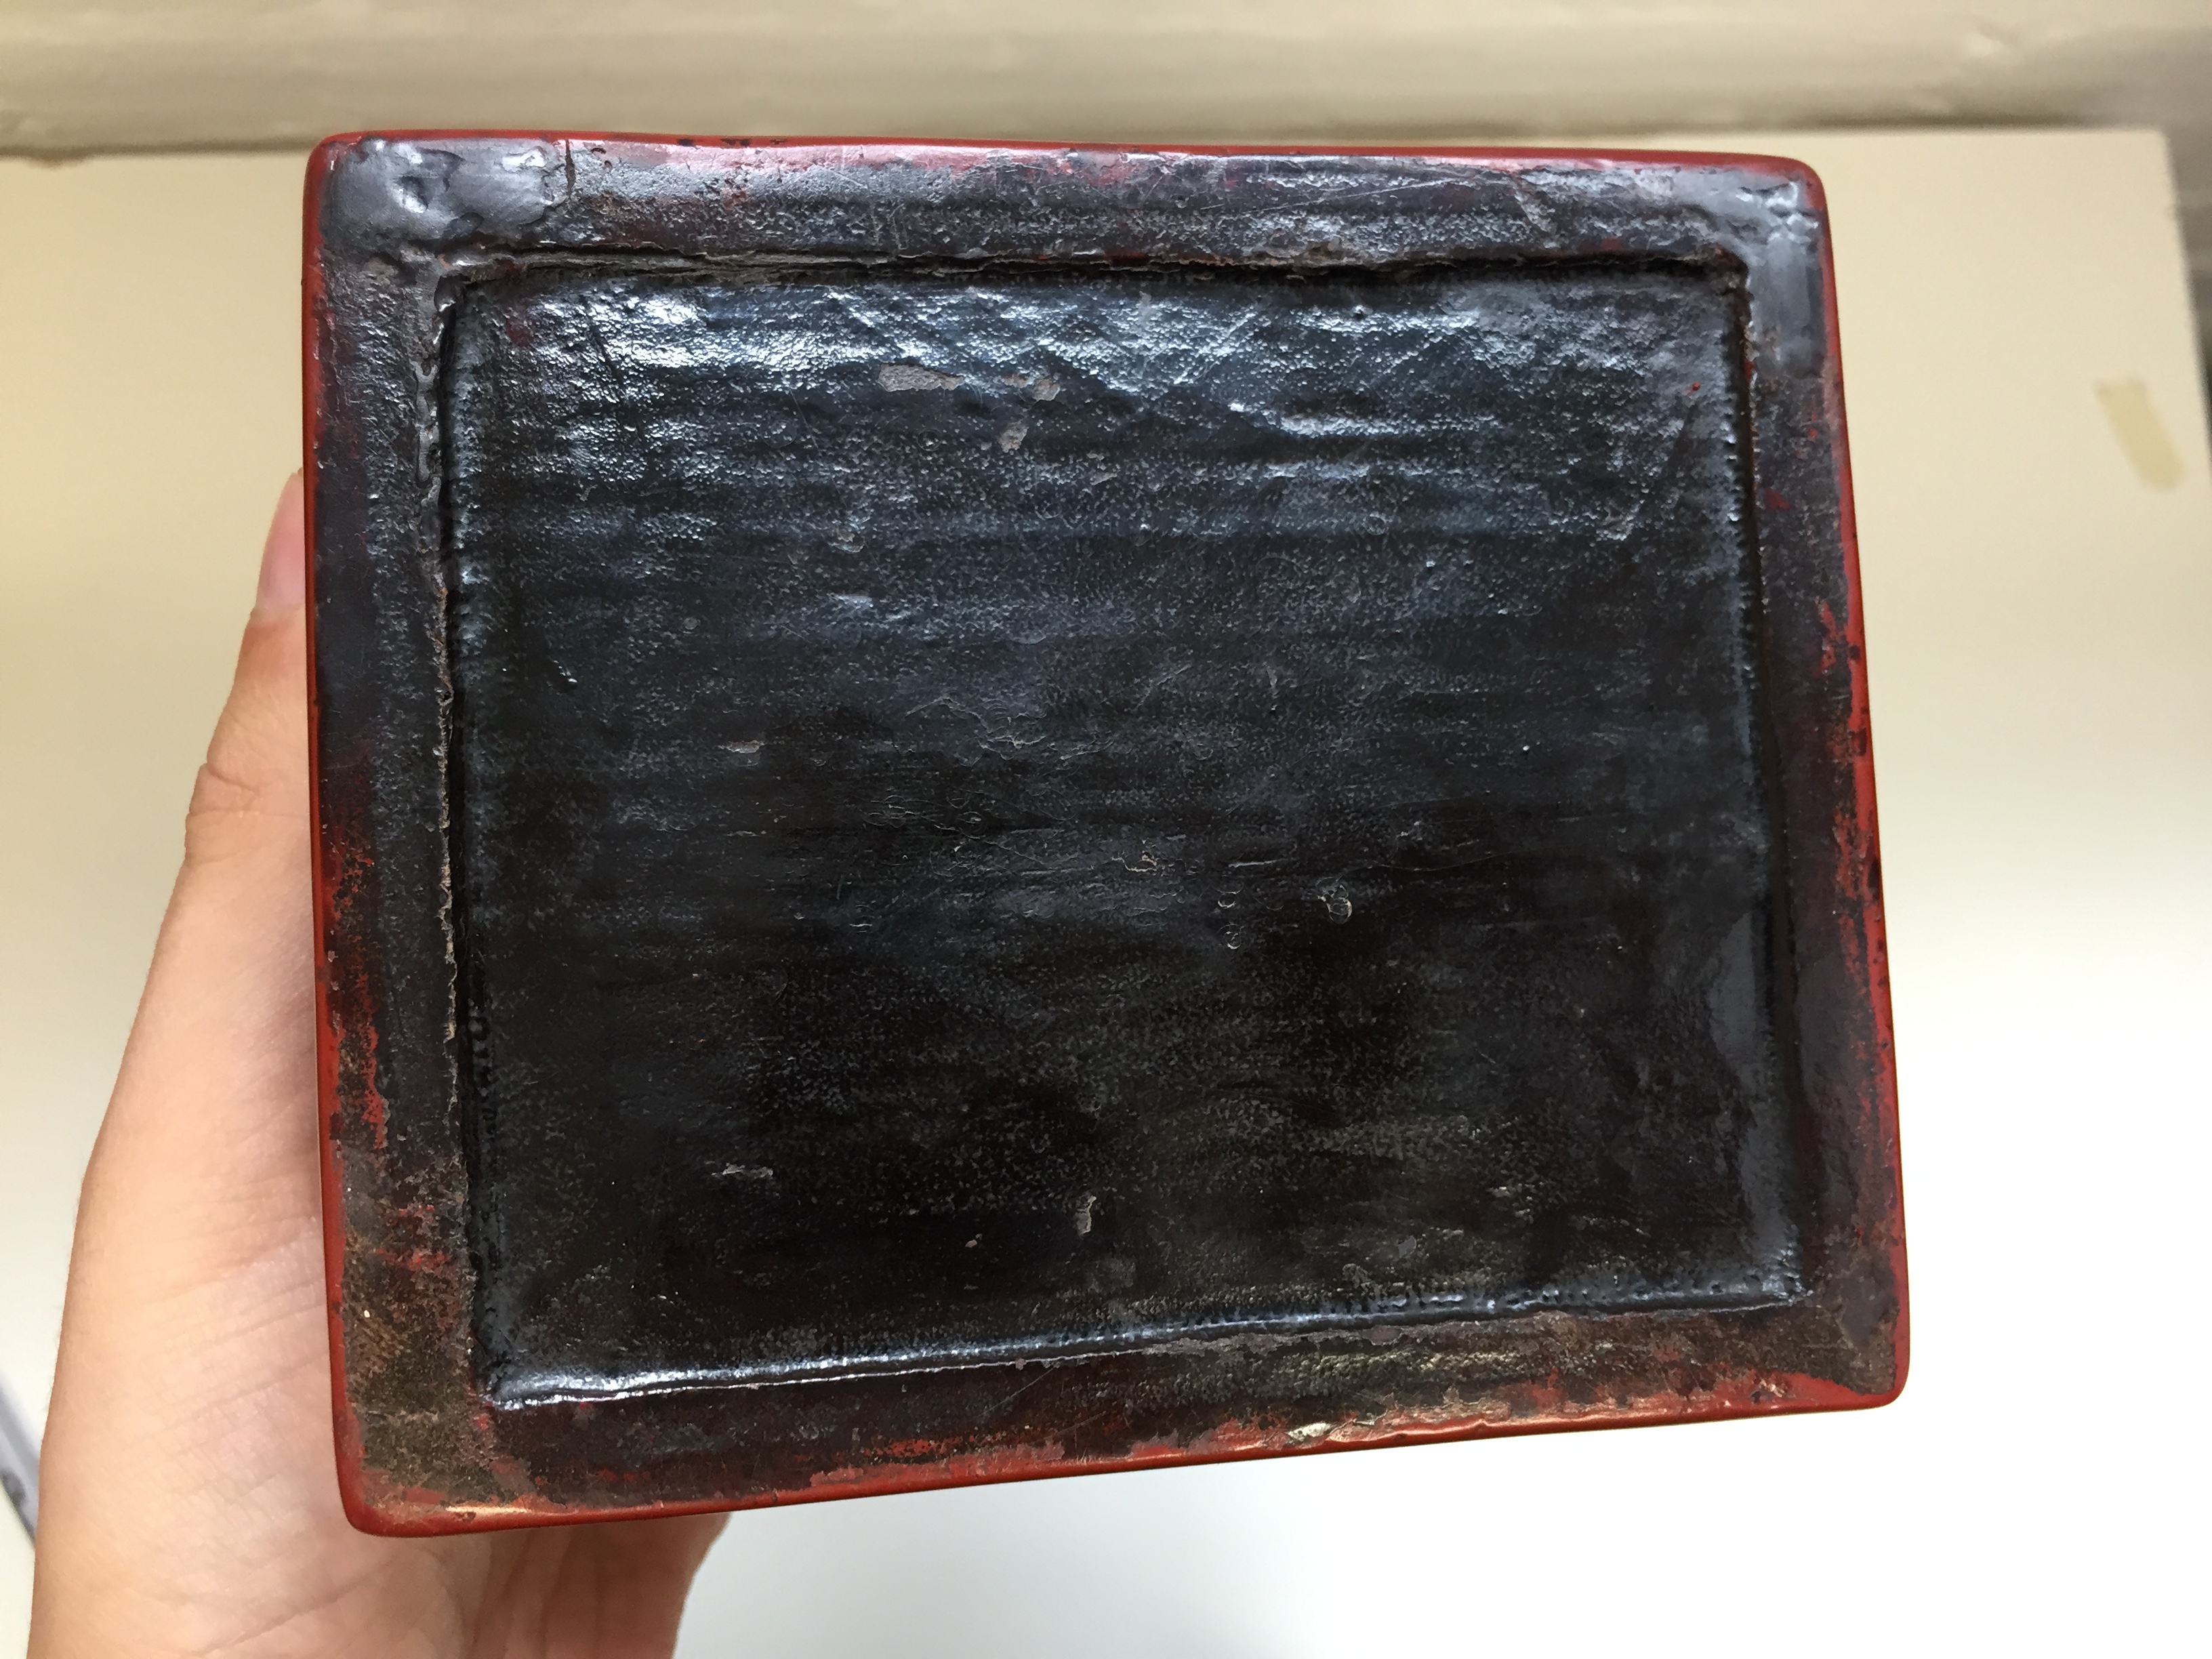 A CHINESE CINNABAR LACQUER 'MUSICIAN' BOX AND COVER 晚明 剔紅圖高士行樂圖紋蓋盒 - Image 15 of 20